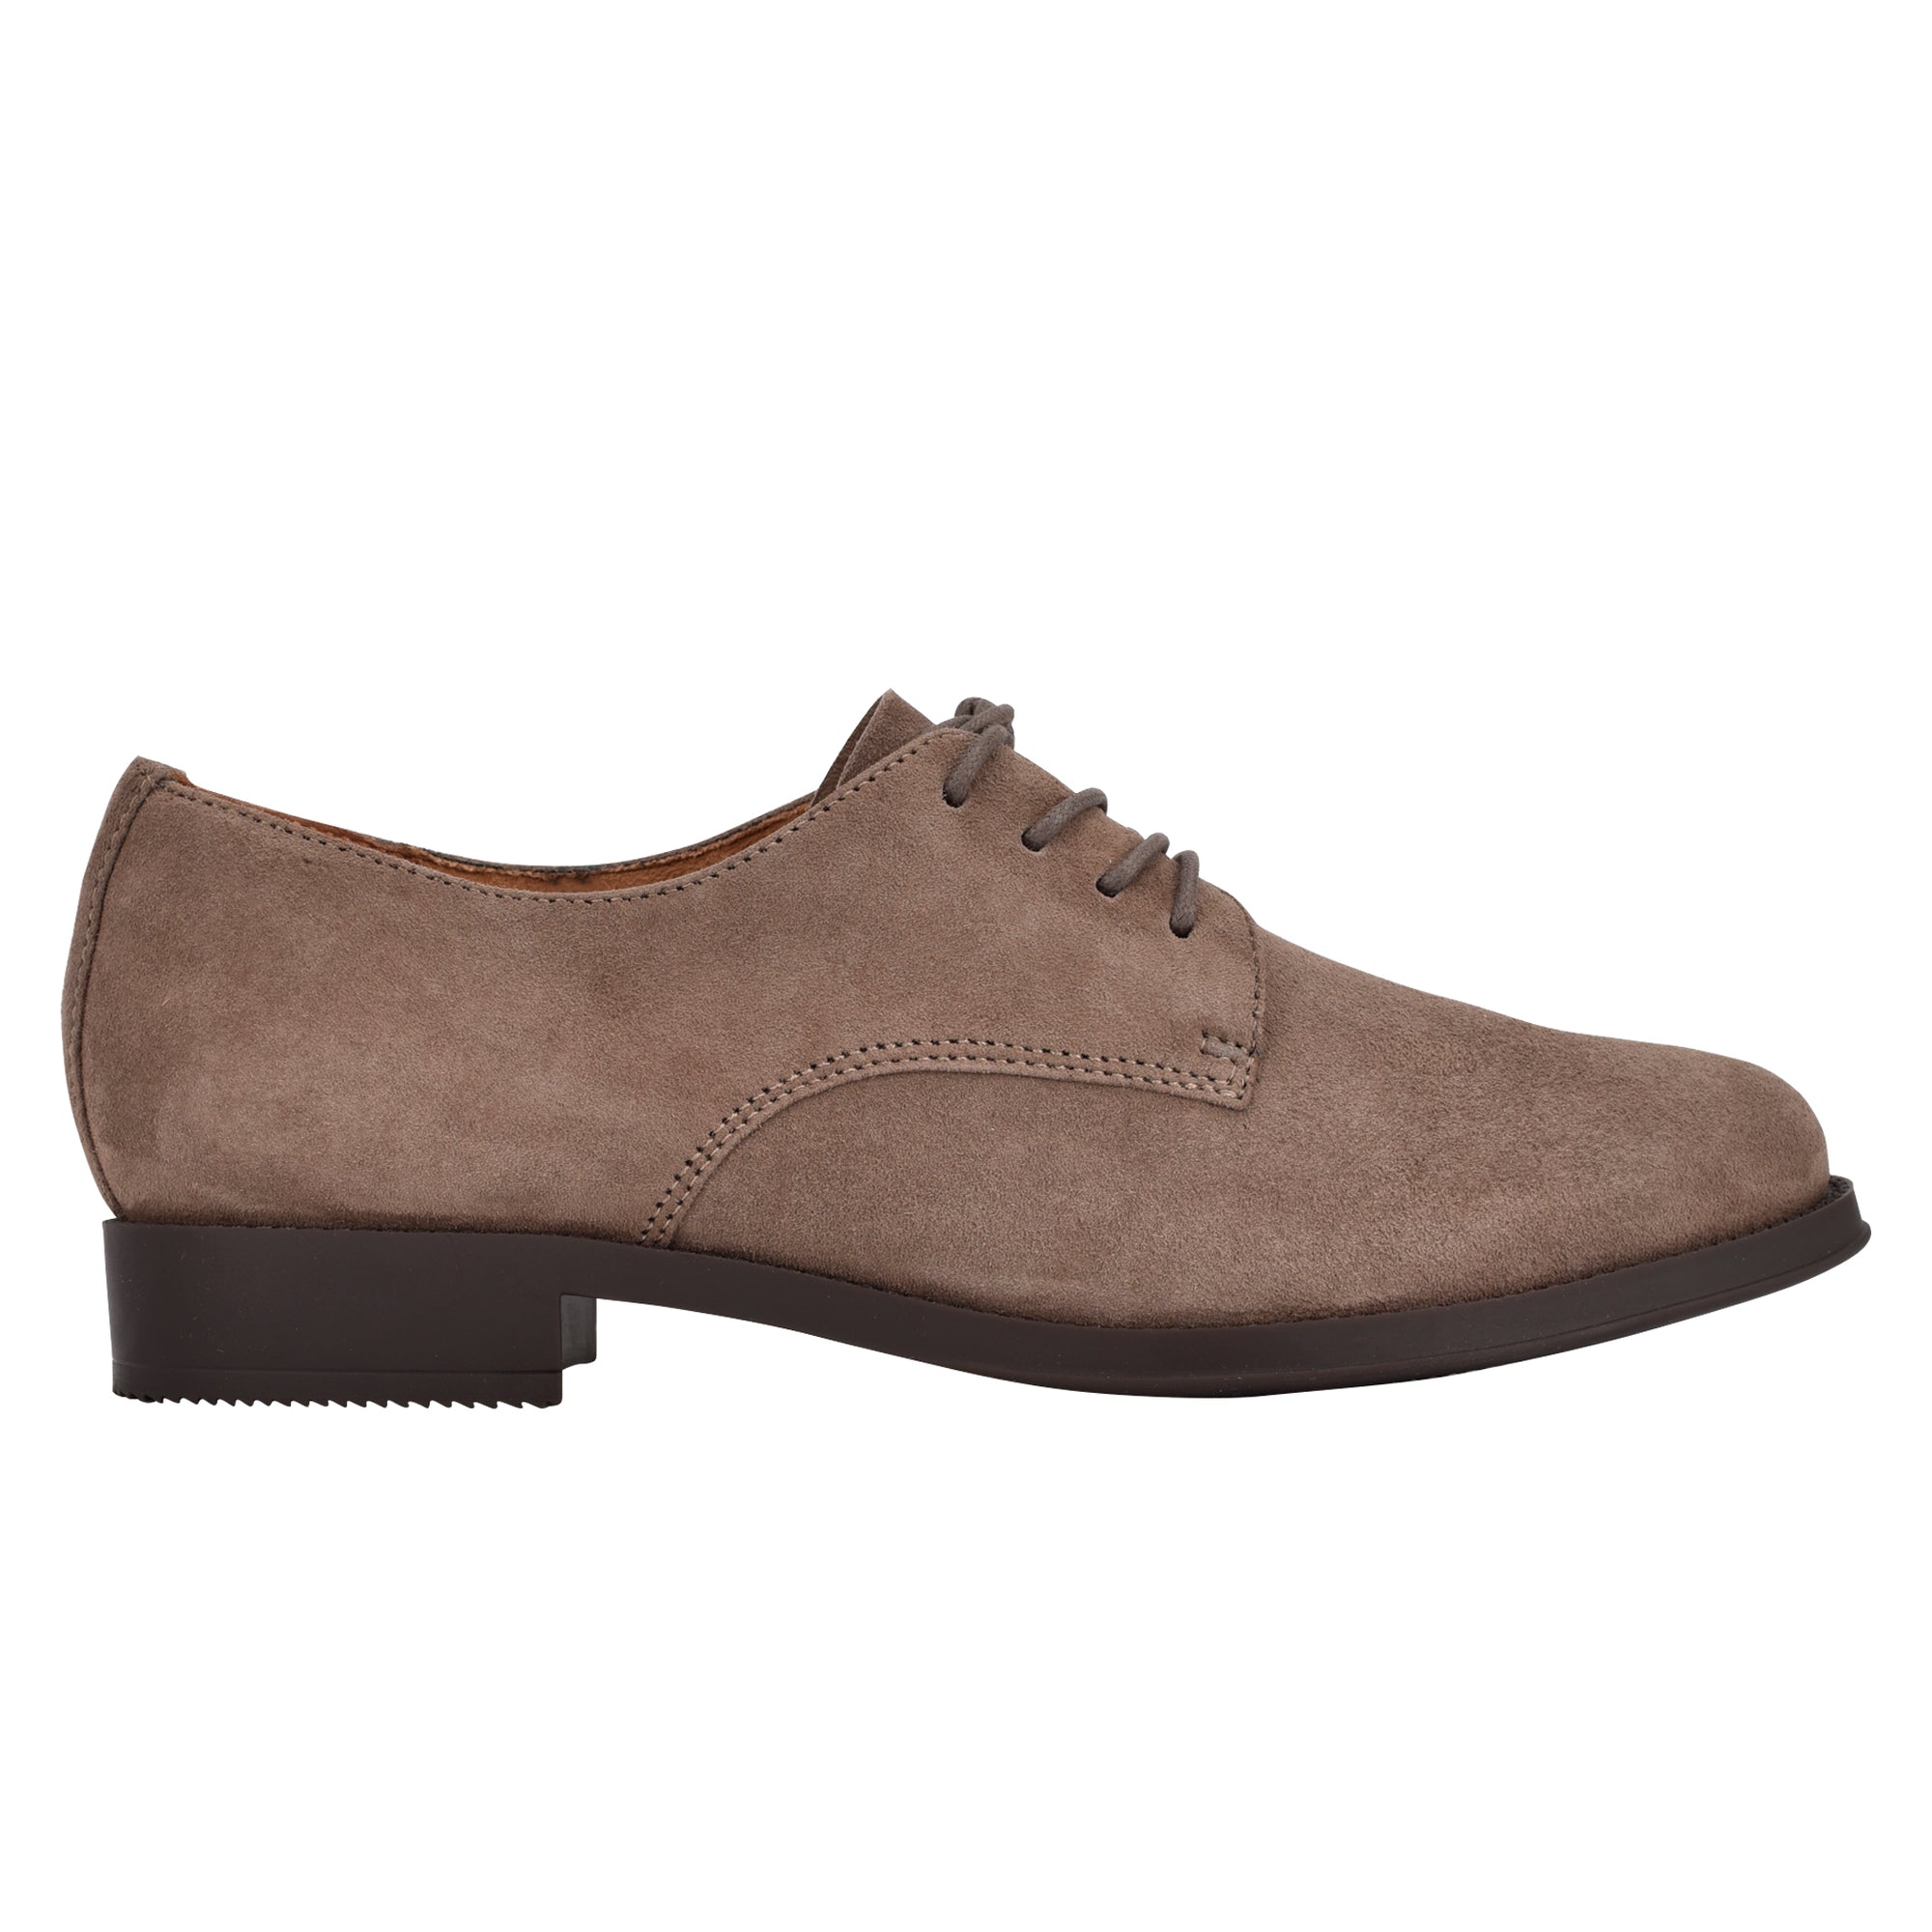 Rania Lace Up Oxfords - Easy Spirit